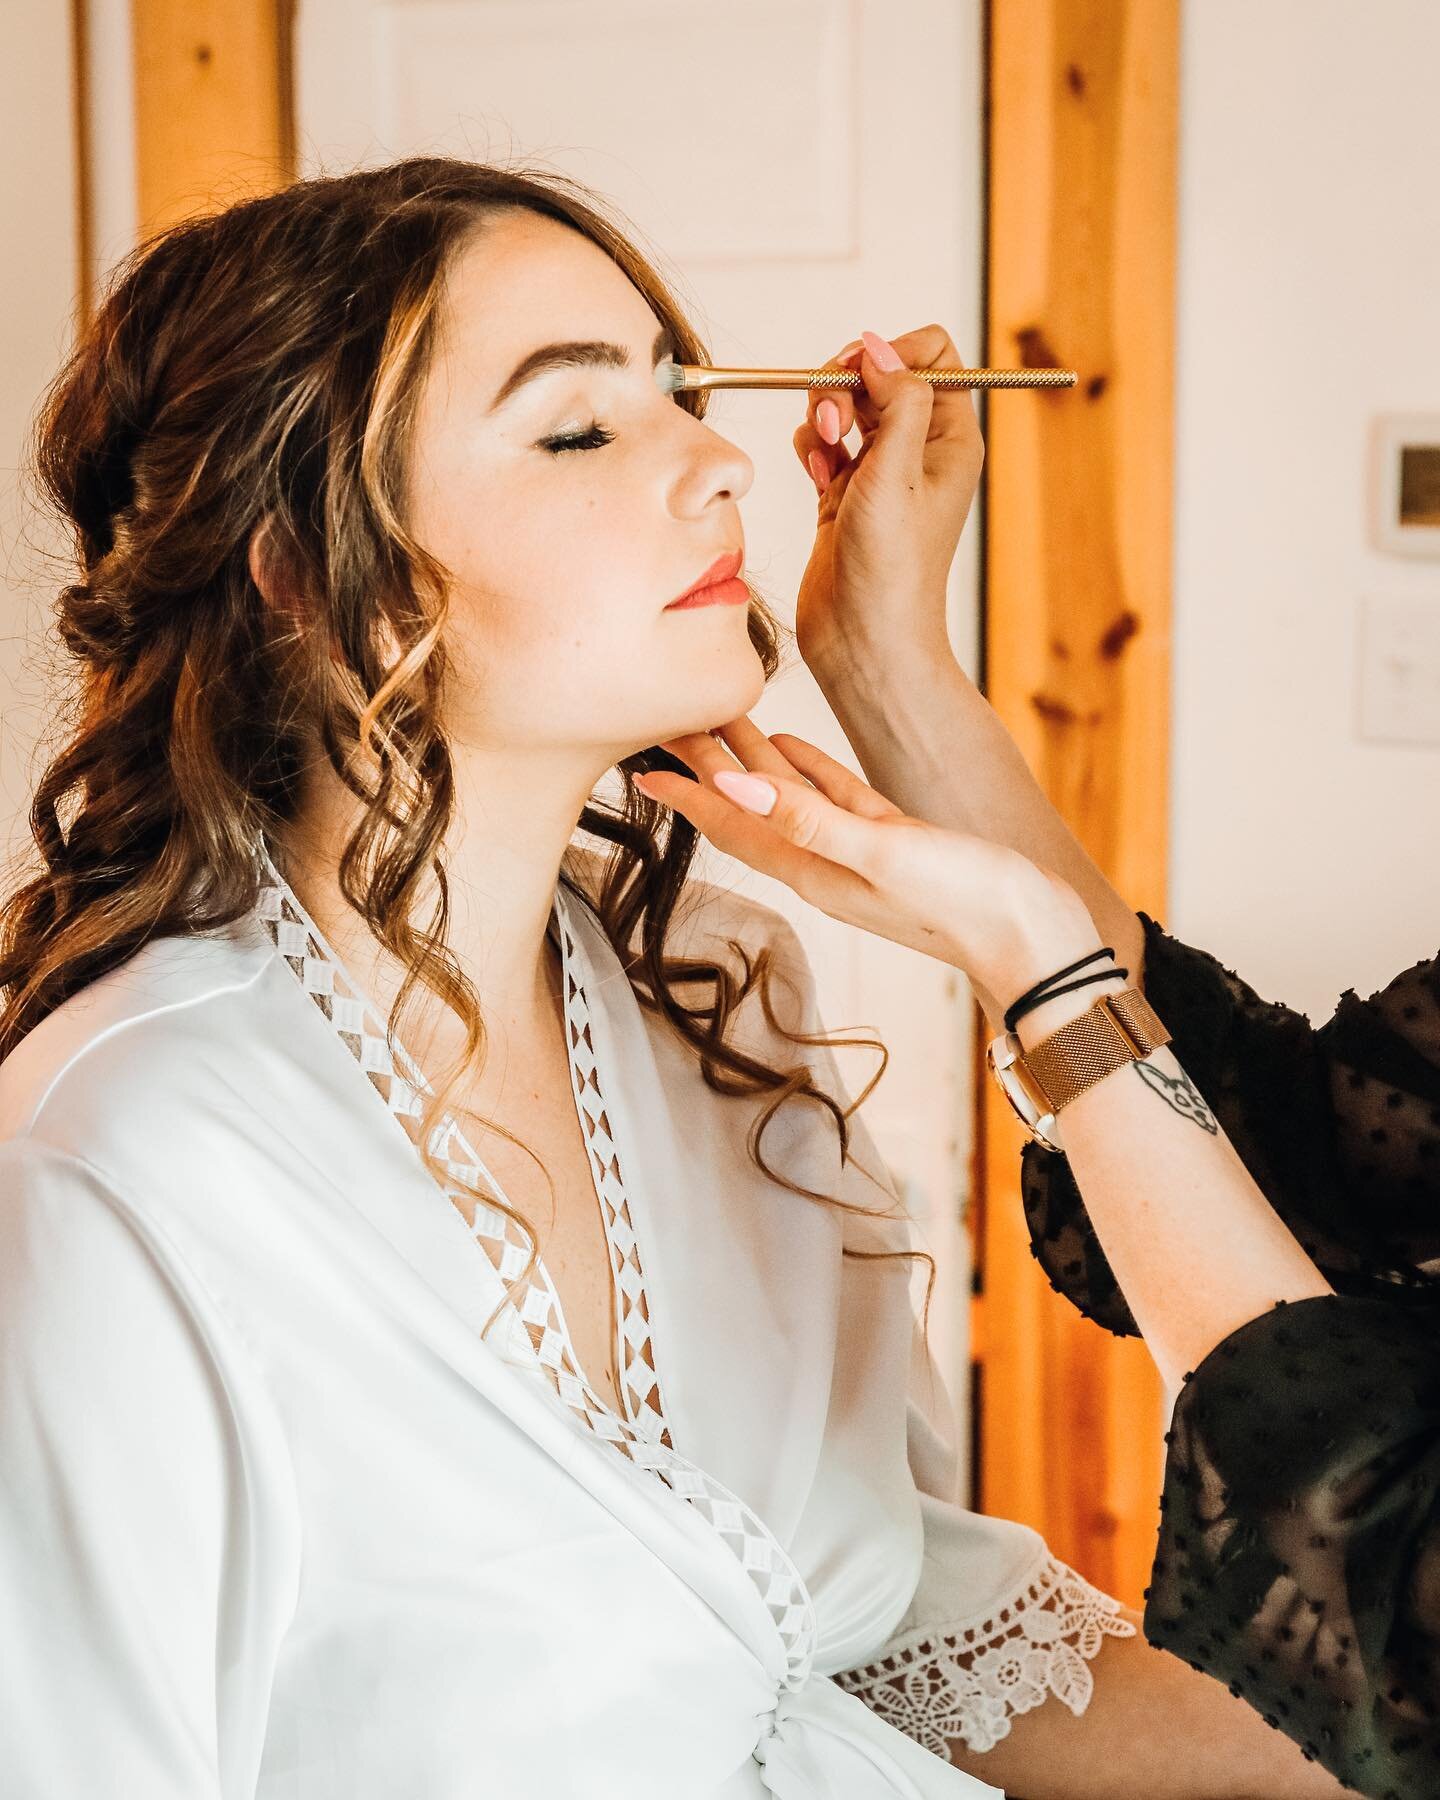 Getting ready photos are my favorite! 
.
.
.
#weddingphotography #weddingphotographer #gettingreadyforwedding #beauty #preparation #naturallightphotography